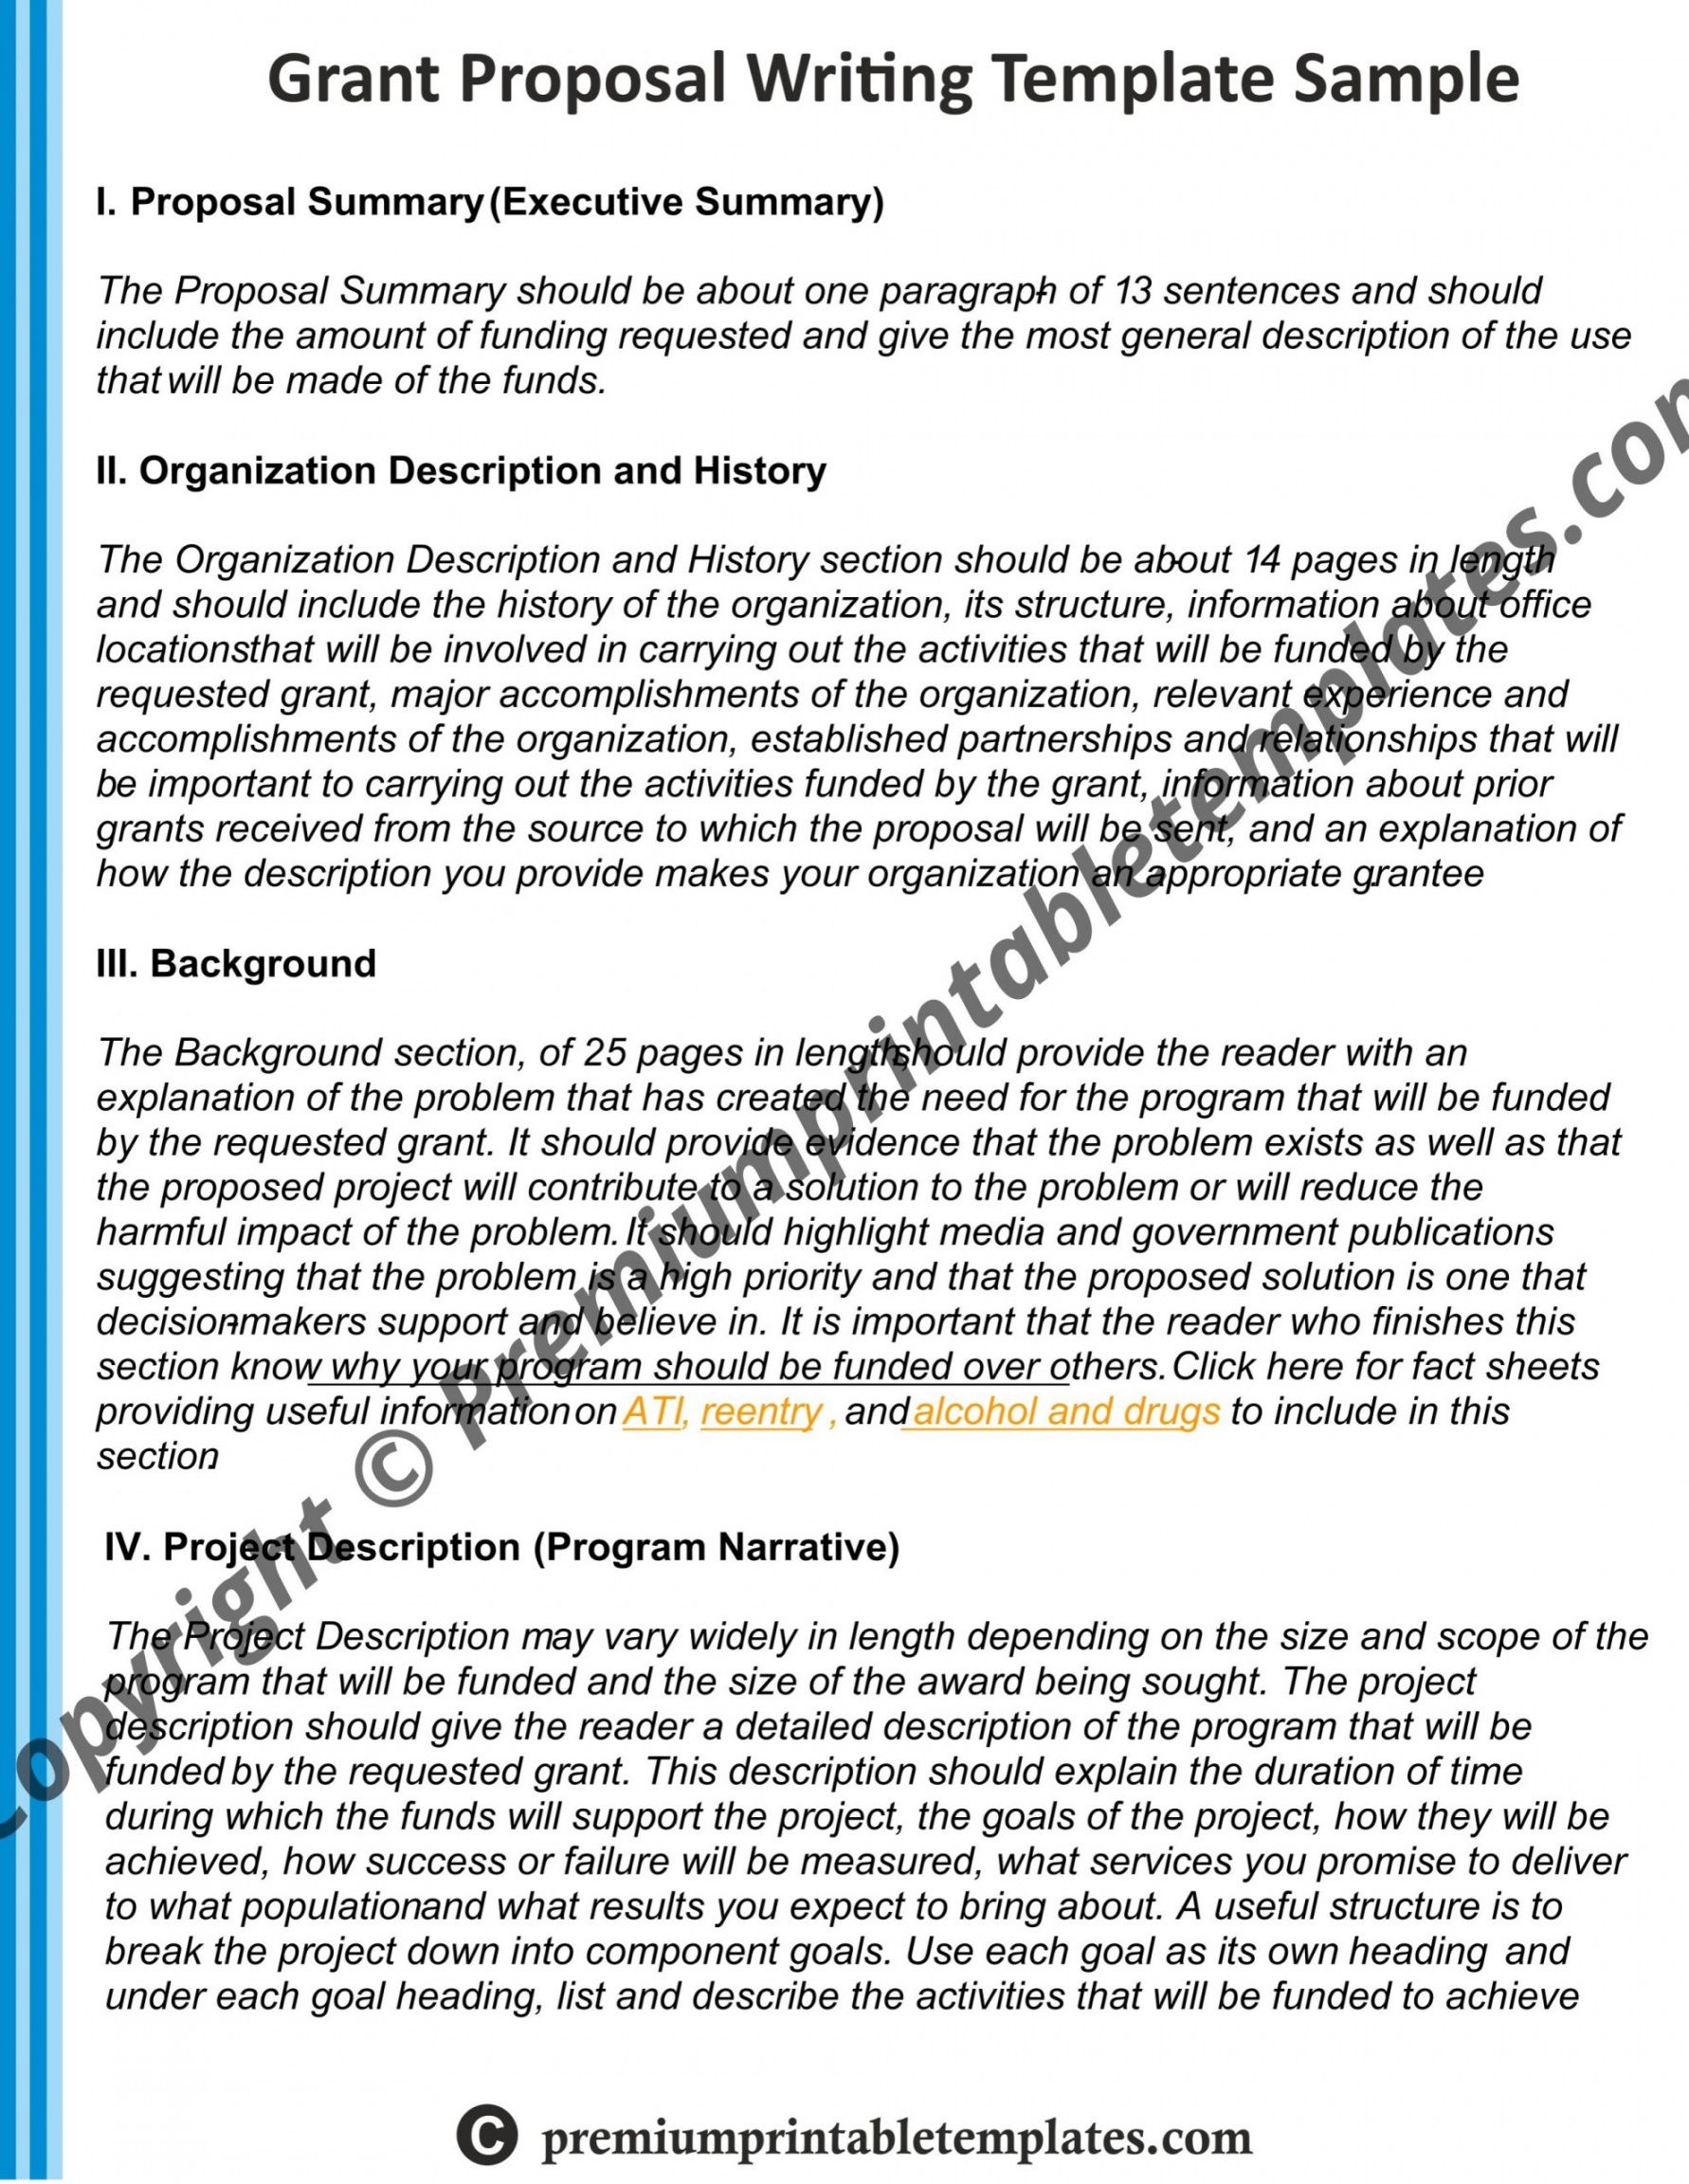 editable grant writing proposal sample pack of 5 request for funding proposal template pdf